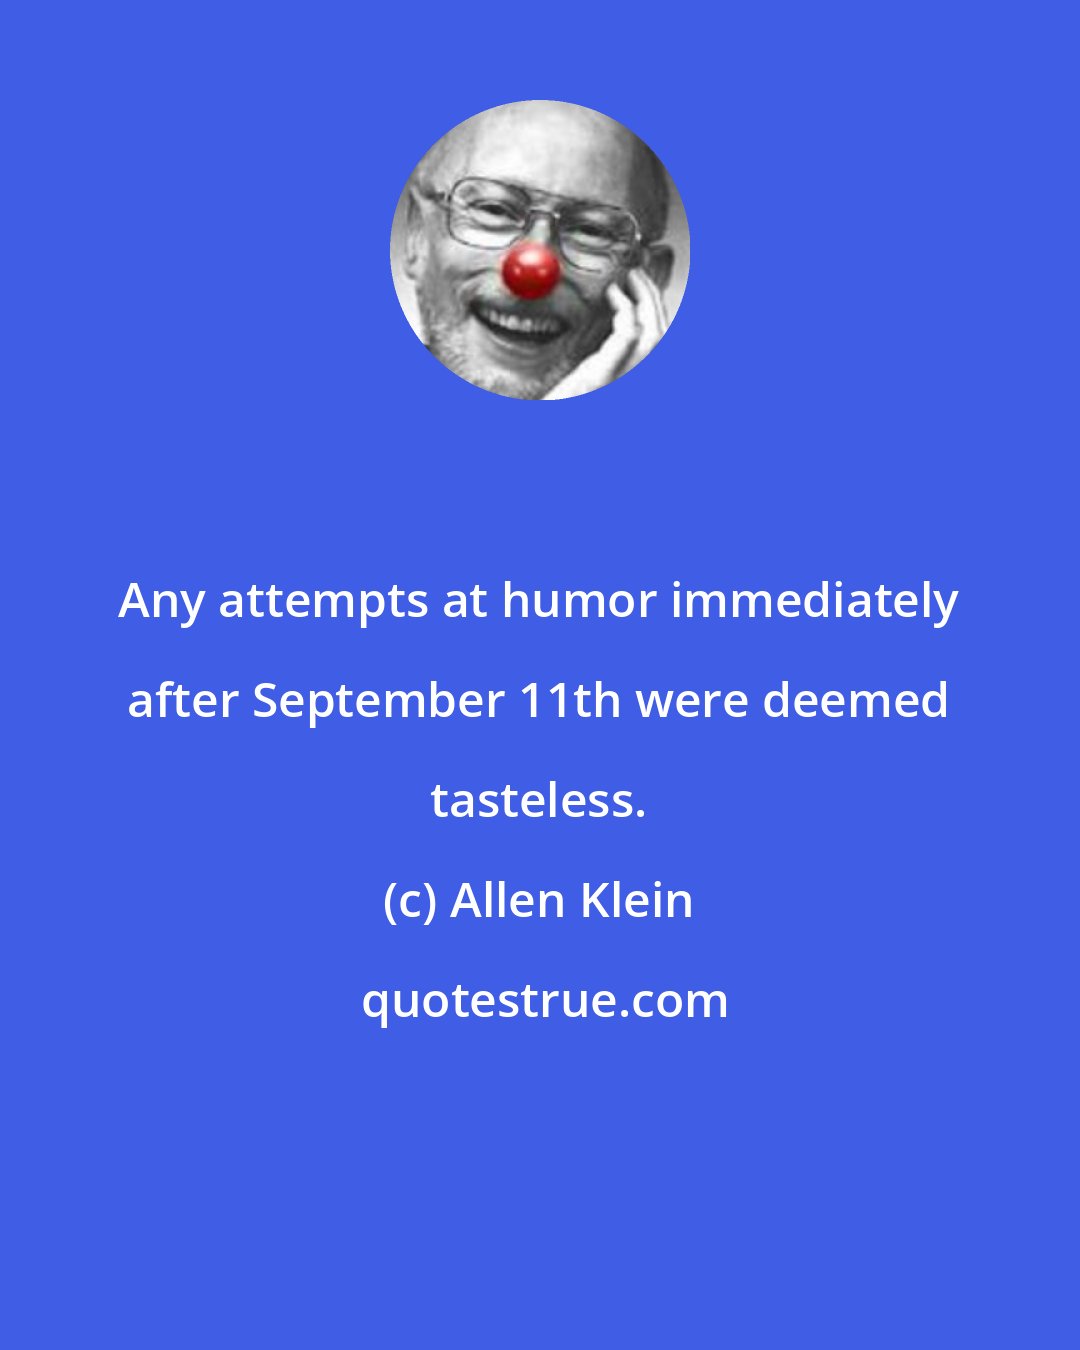 Allen Klein: Any attempts at humor immediately after September 11th were deemed tasteless.